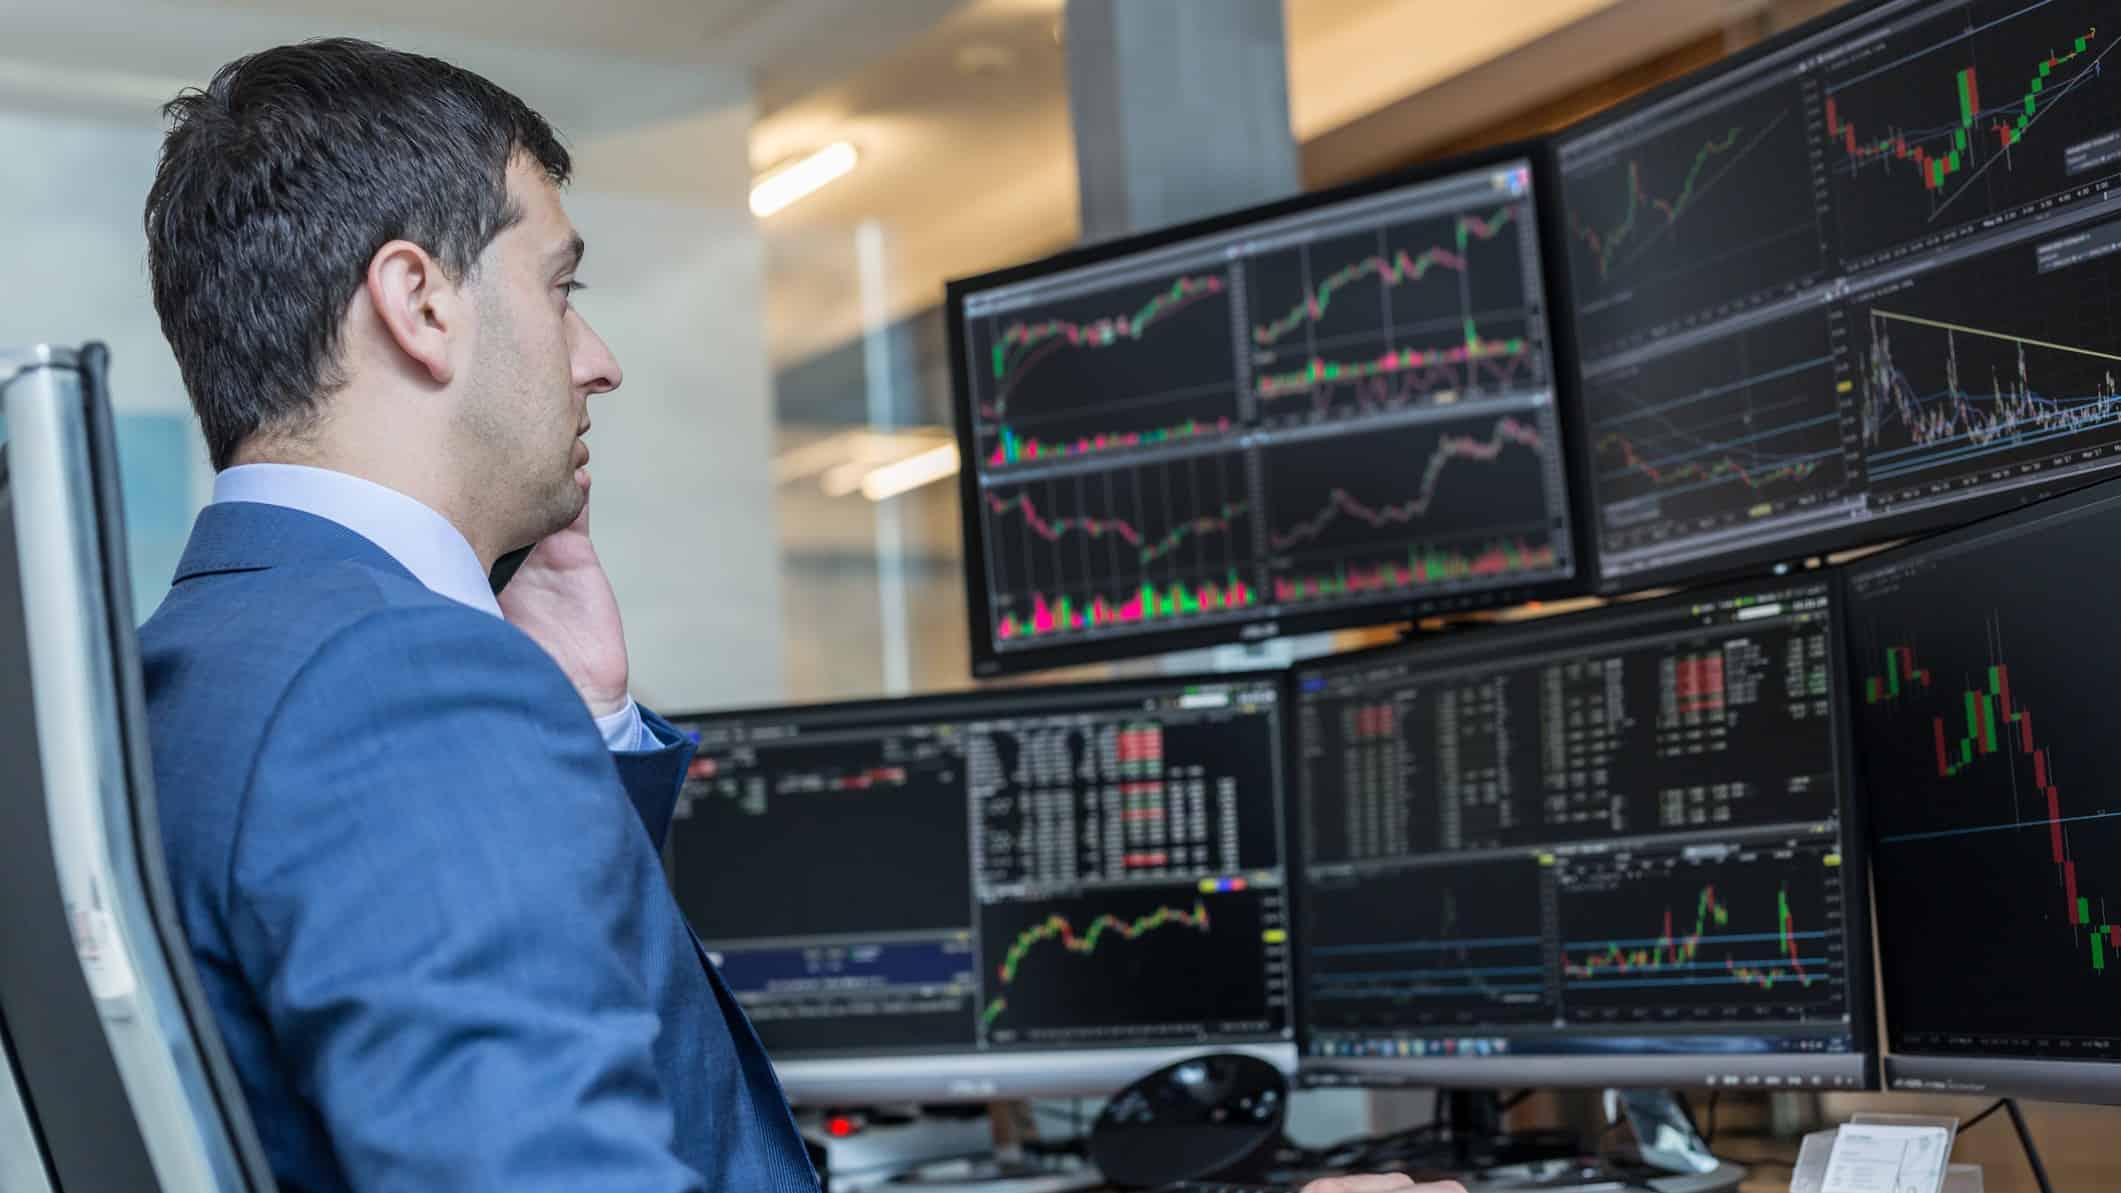 A share market analyst looks at various computer screens in front of him showing stock price movements